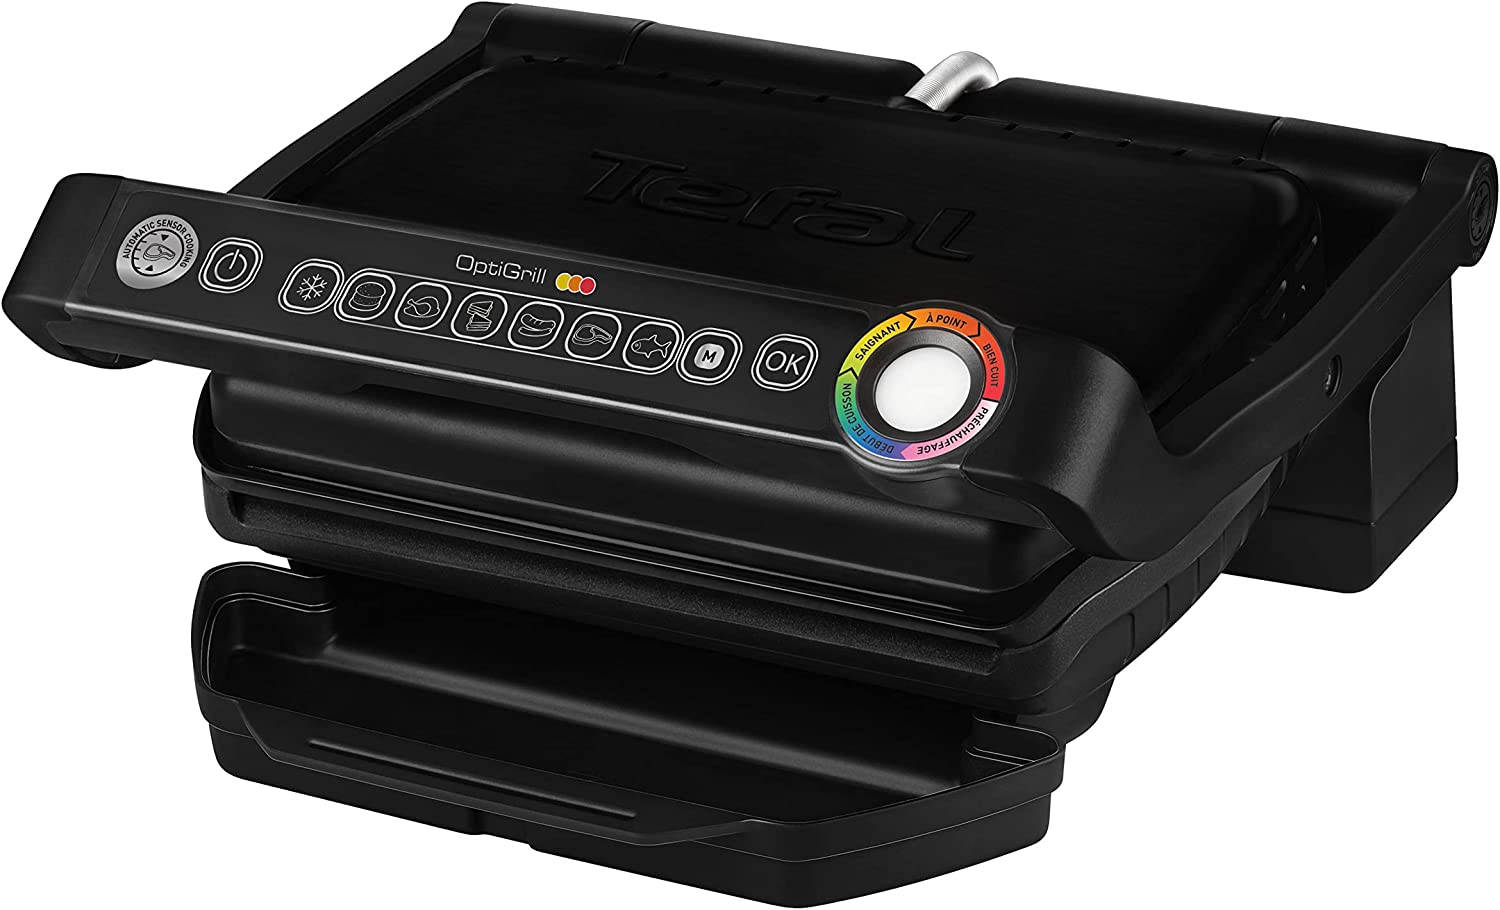 Tefal GC7058 OptiGrill Intelligent Contact Grill | 6 Automatic Programmes | Adapts Temperature + Grill Cycle to Grill Food | Non-Stick Plates | 600 cm² Grill Surface | Black